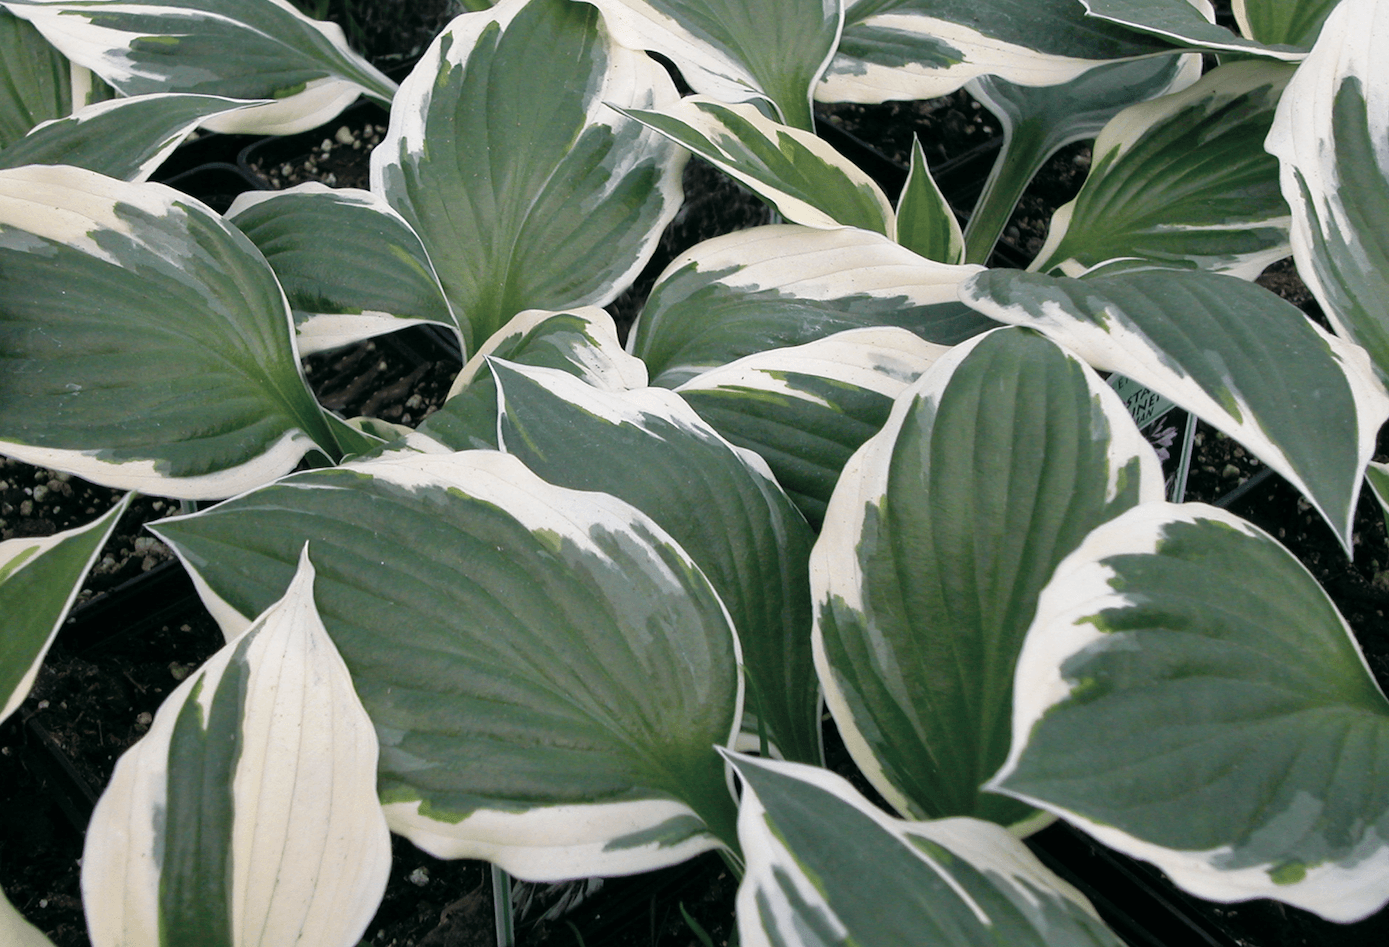 With its attractive foliage and compact growth habit, it is well-suited for various garden applications. Whether used for mass plantings, ground cover, container gardening, or as a specimen plant, the Minuteman Hosta adds beauty and texture to any landscape. Spreads 60cm, suitable for zone 2. Its lush leaves, featuring a striking green color with crisp white margins, create a visually appealing contrast.